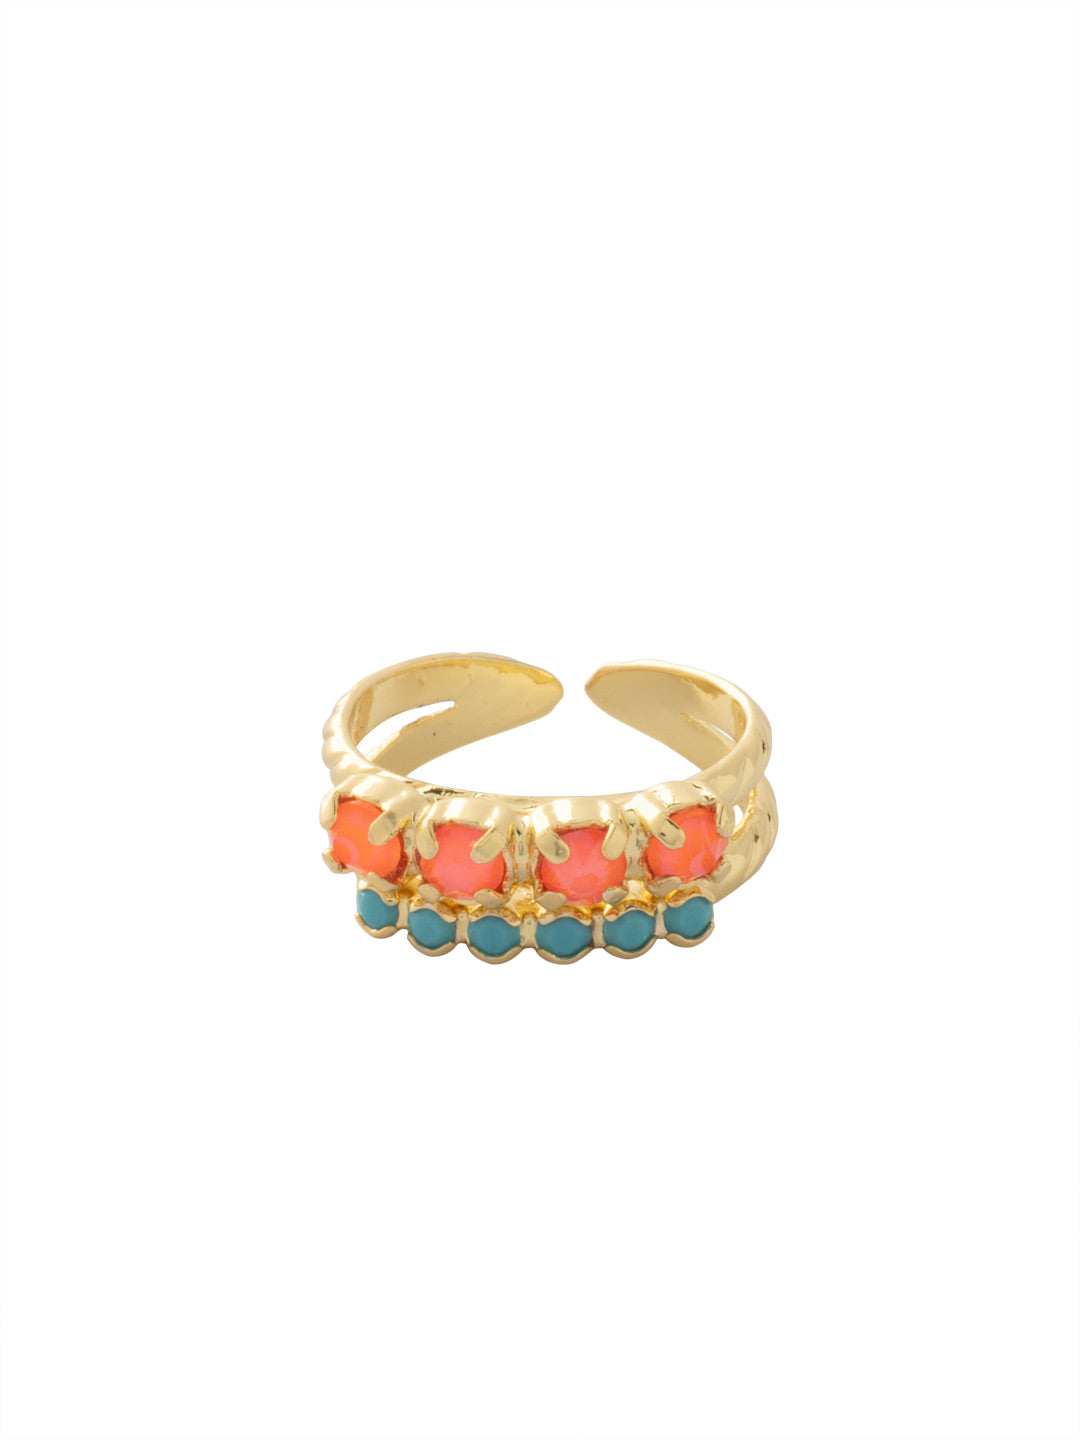 Crystal Studded Stacked Ring - RFM53BGPRT - <p>The Crystal Studded Stacked Ring features two rows of crystals on an adjustable stacked band. From Sorrelli's Portofino collection in our Bright Gold-tone finish.</p>